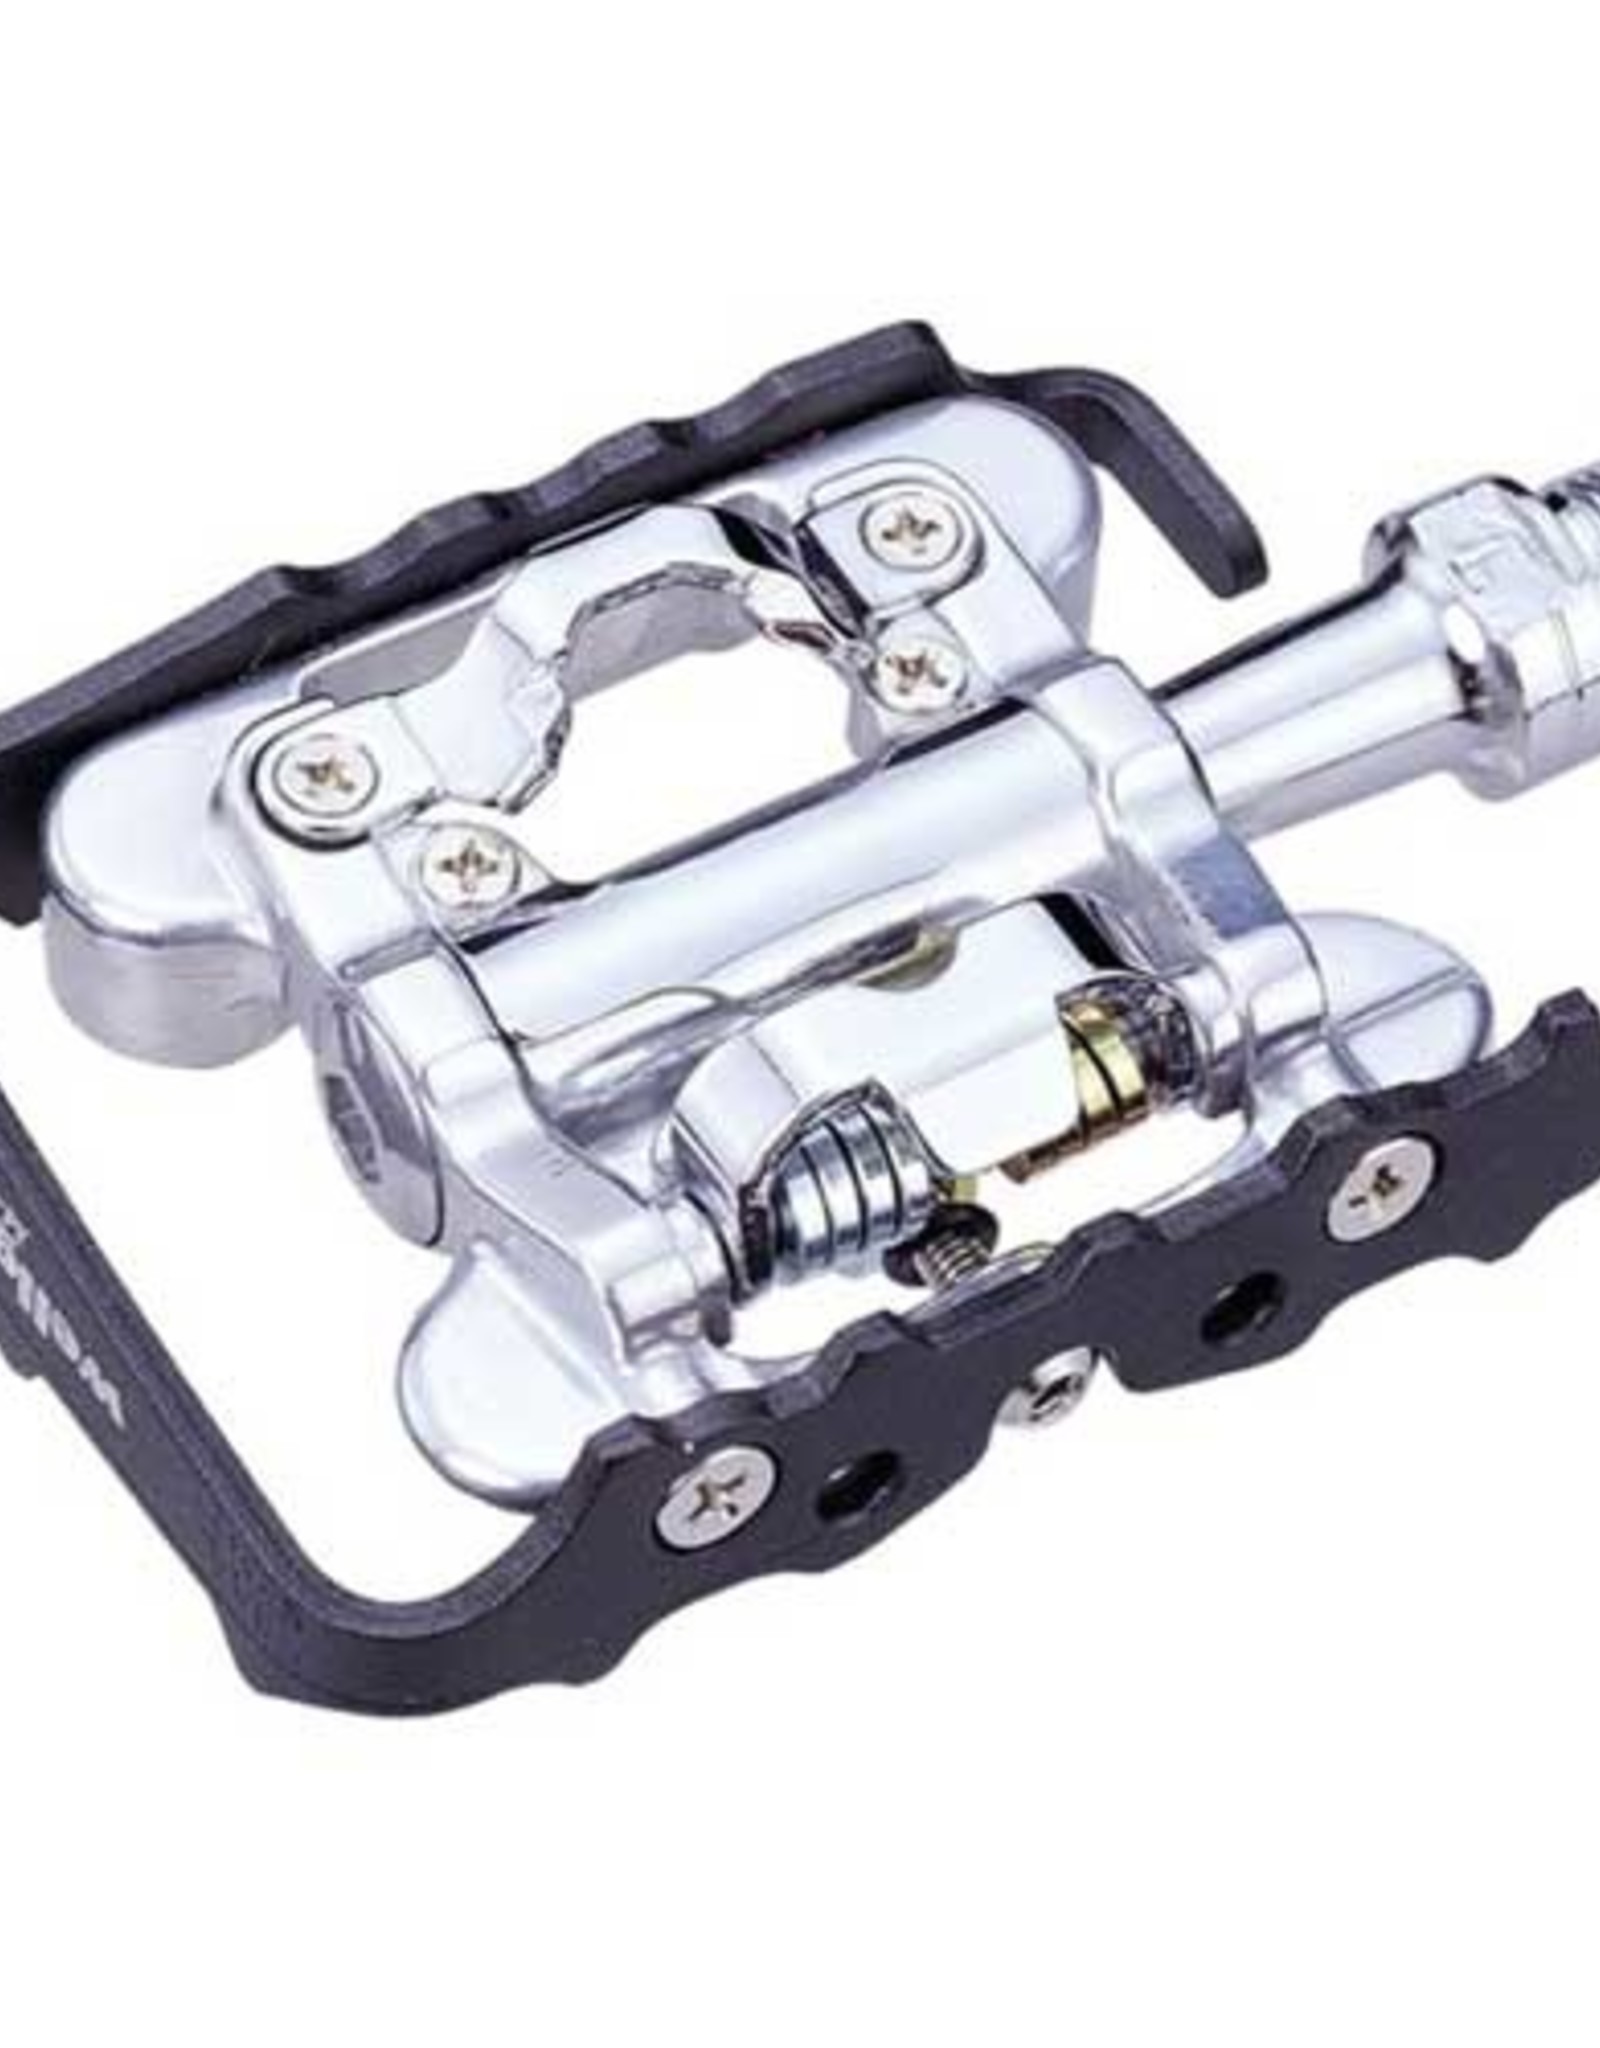 Wellgo C002B Trekking SPD Pedal Shimano Cleat Compatible with Sealed Bearing